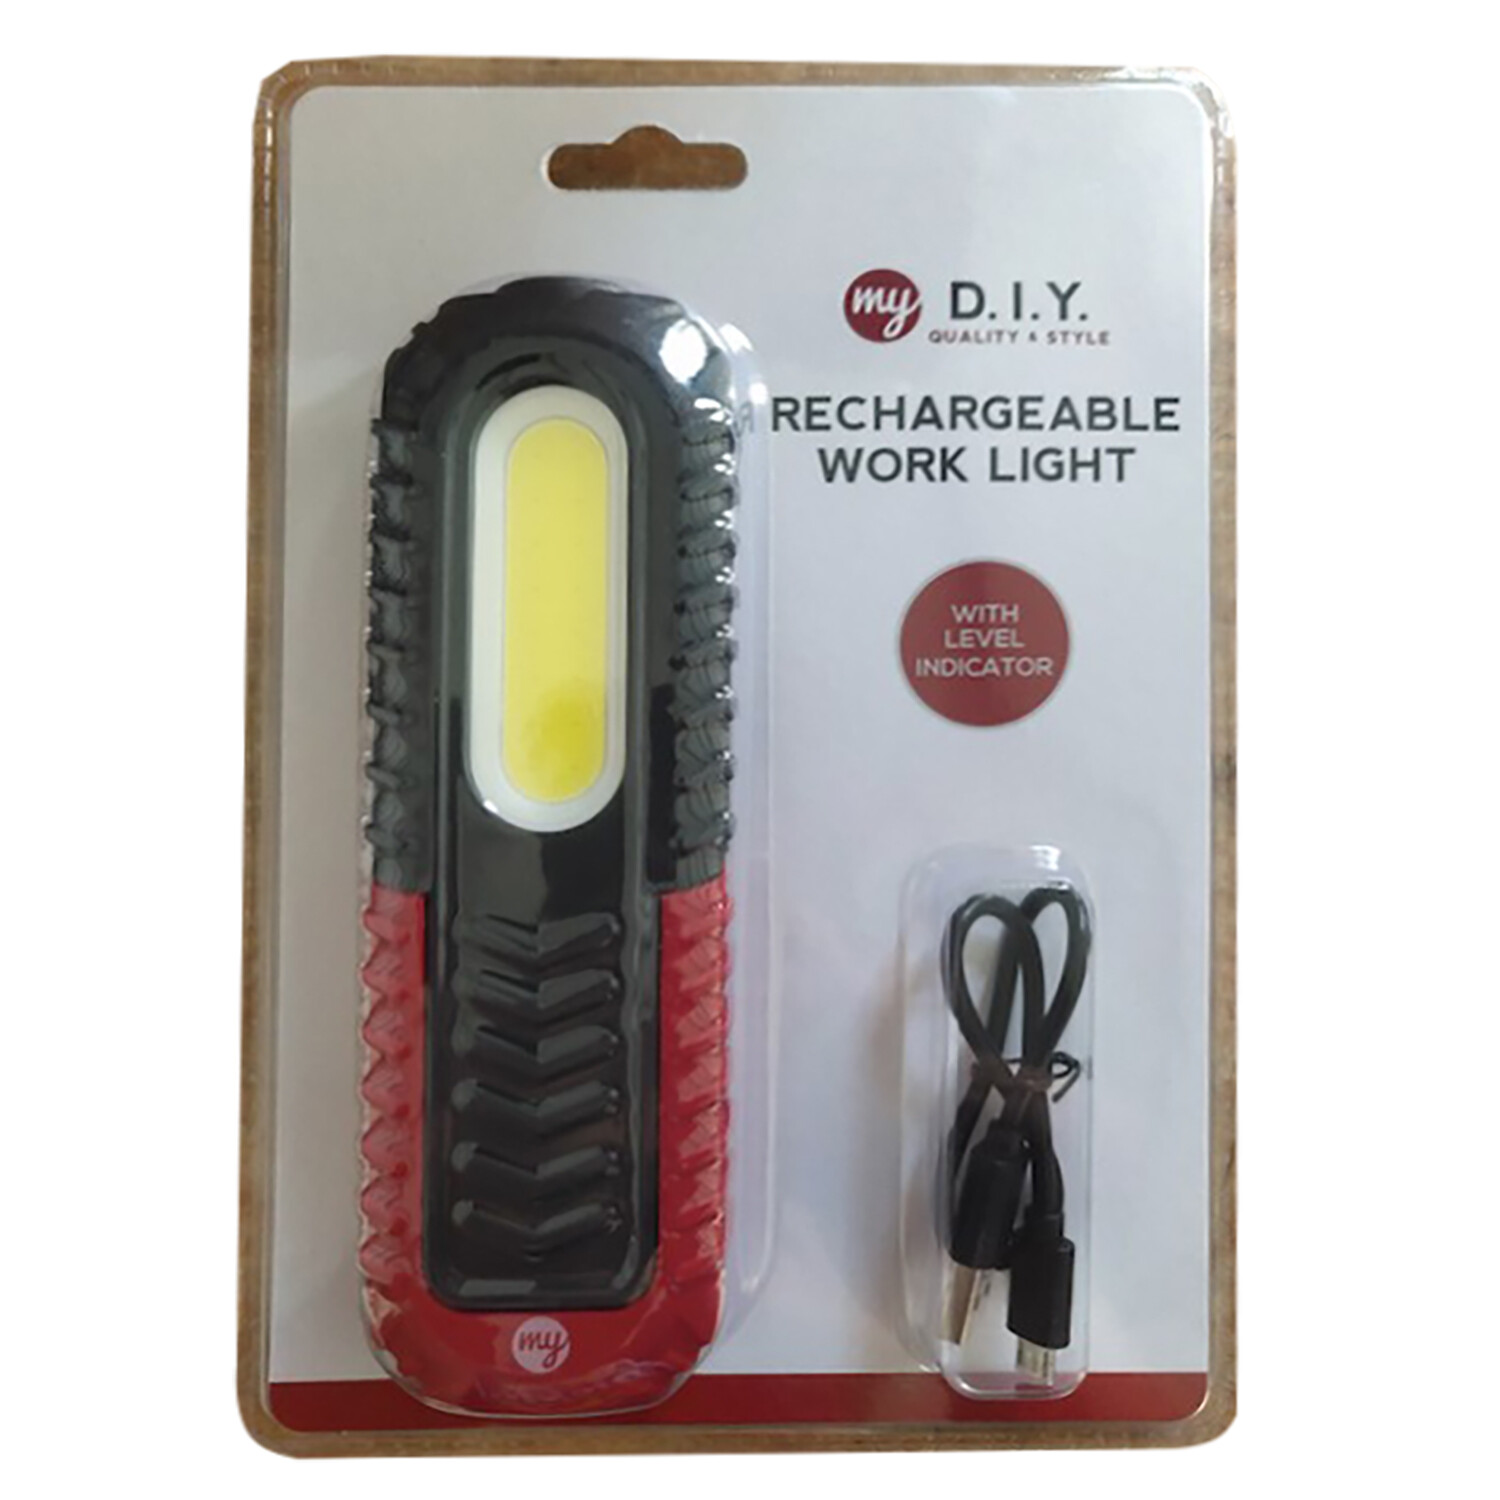 My DIY Rechargeable Work Light Image 1